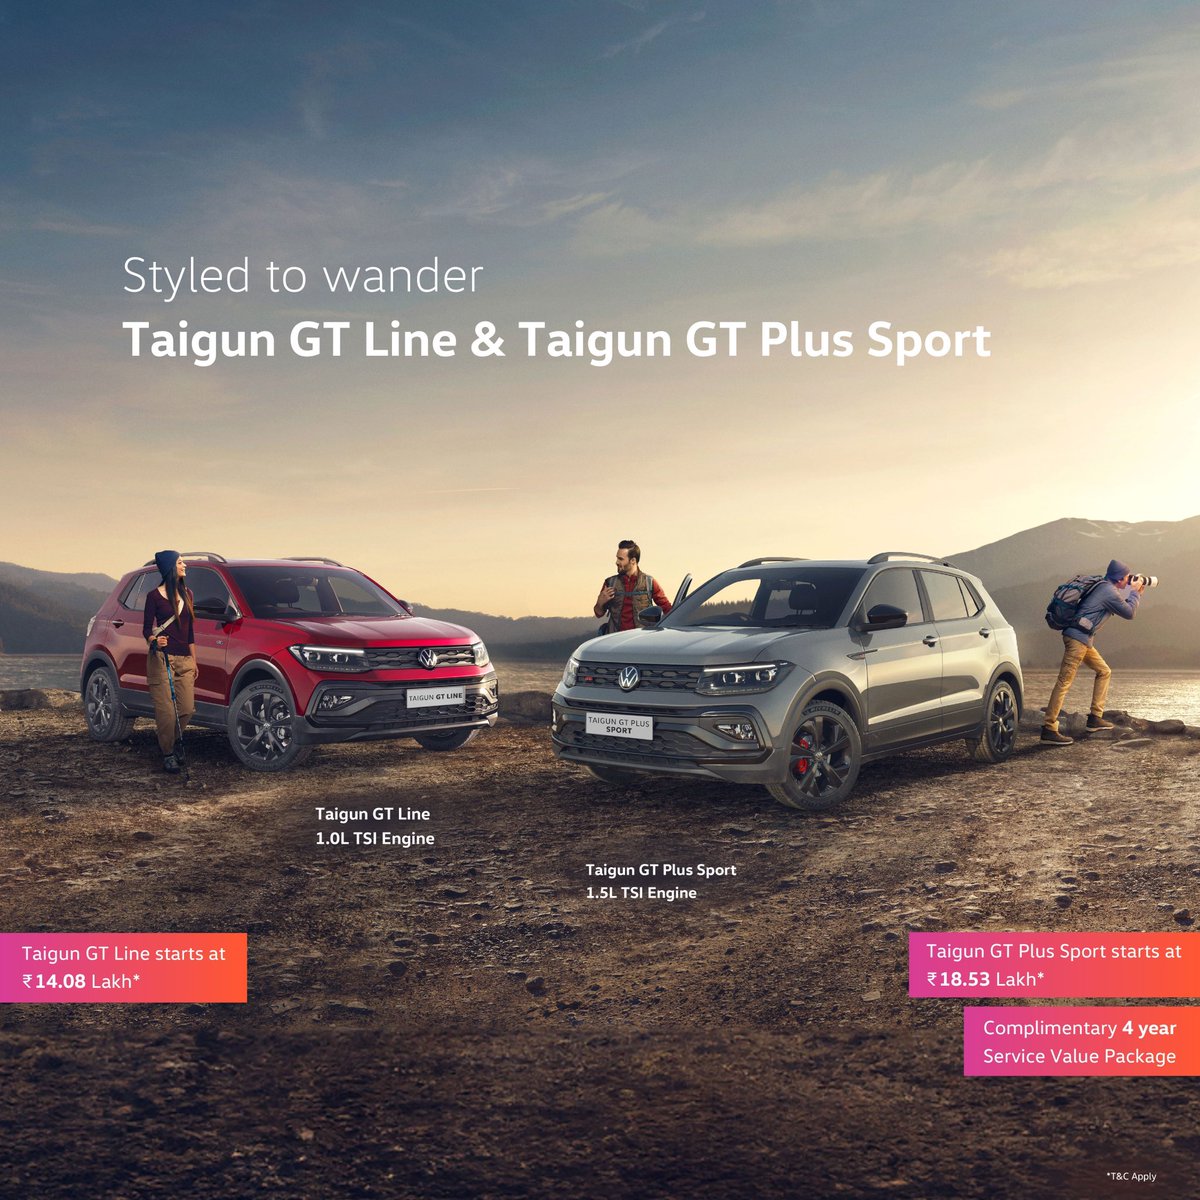 Introducing Taigun GT Line & Taigun GT Plus Sport, our most attractive roaming packages with Sporty black interior & exteriors, R17 alloy wheels, 6 airbags, darkened LED headlamps with DRLs & more. Book a test drive today: bit.ly/TaigunSport #TaigunSport #VolkswagenIndia